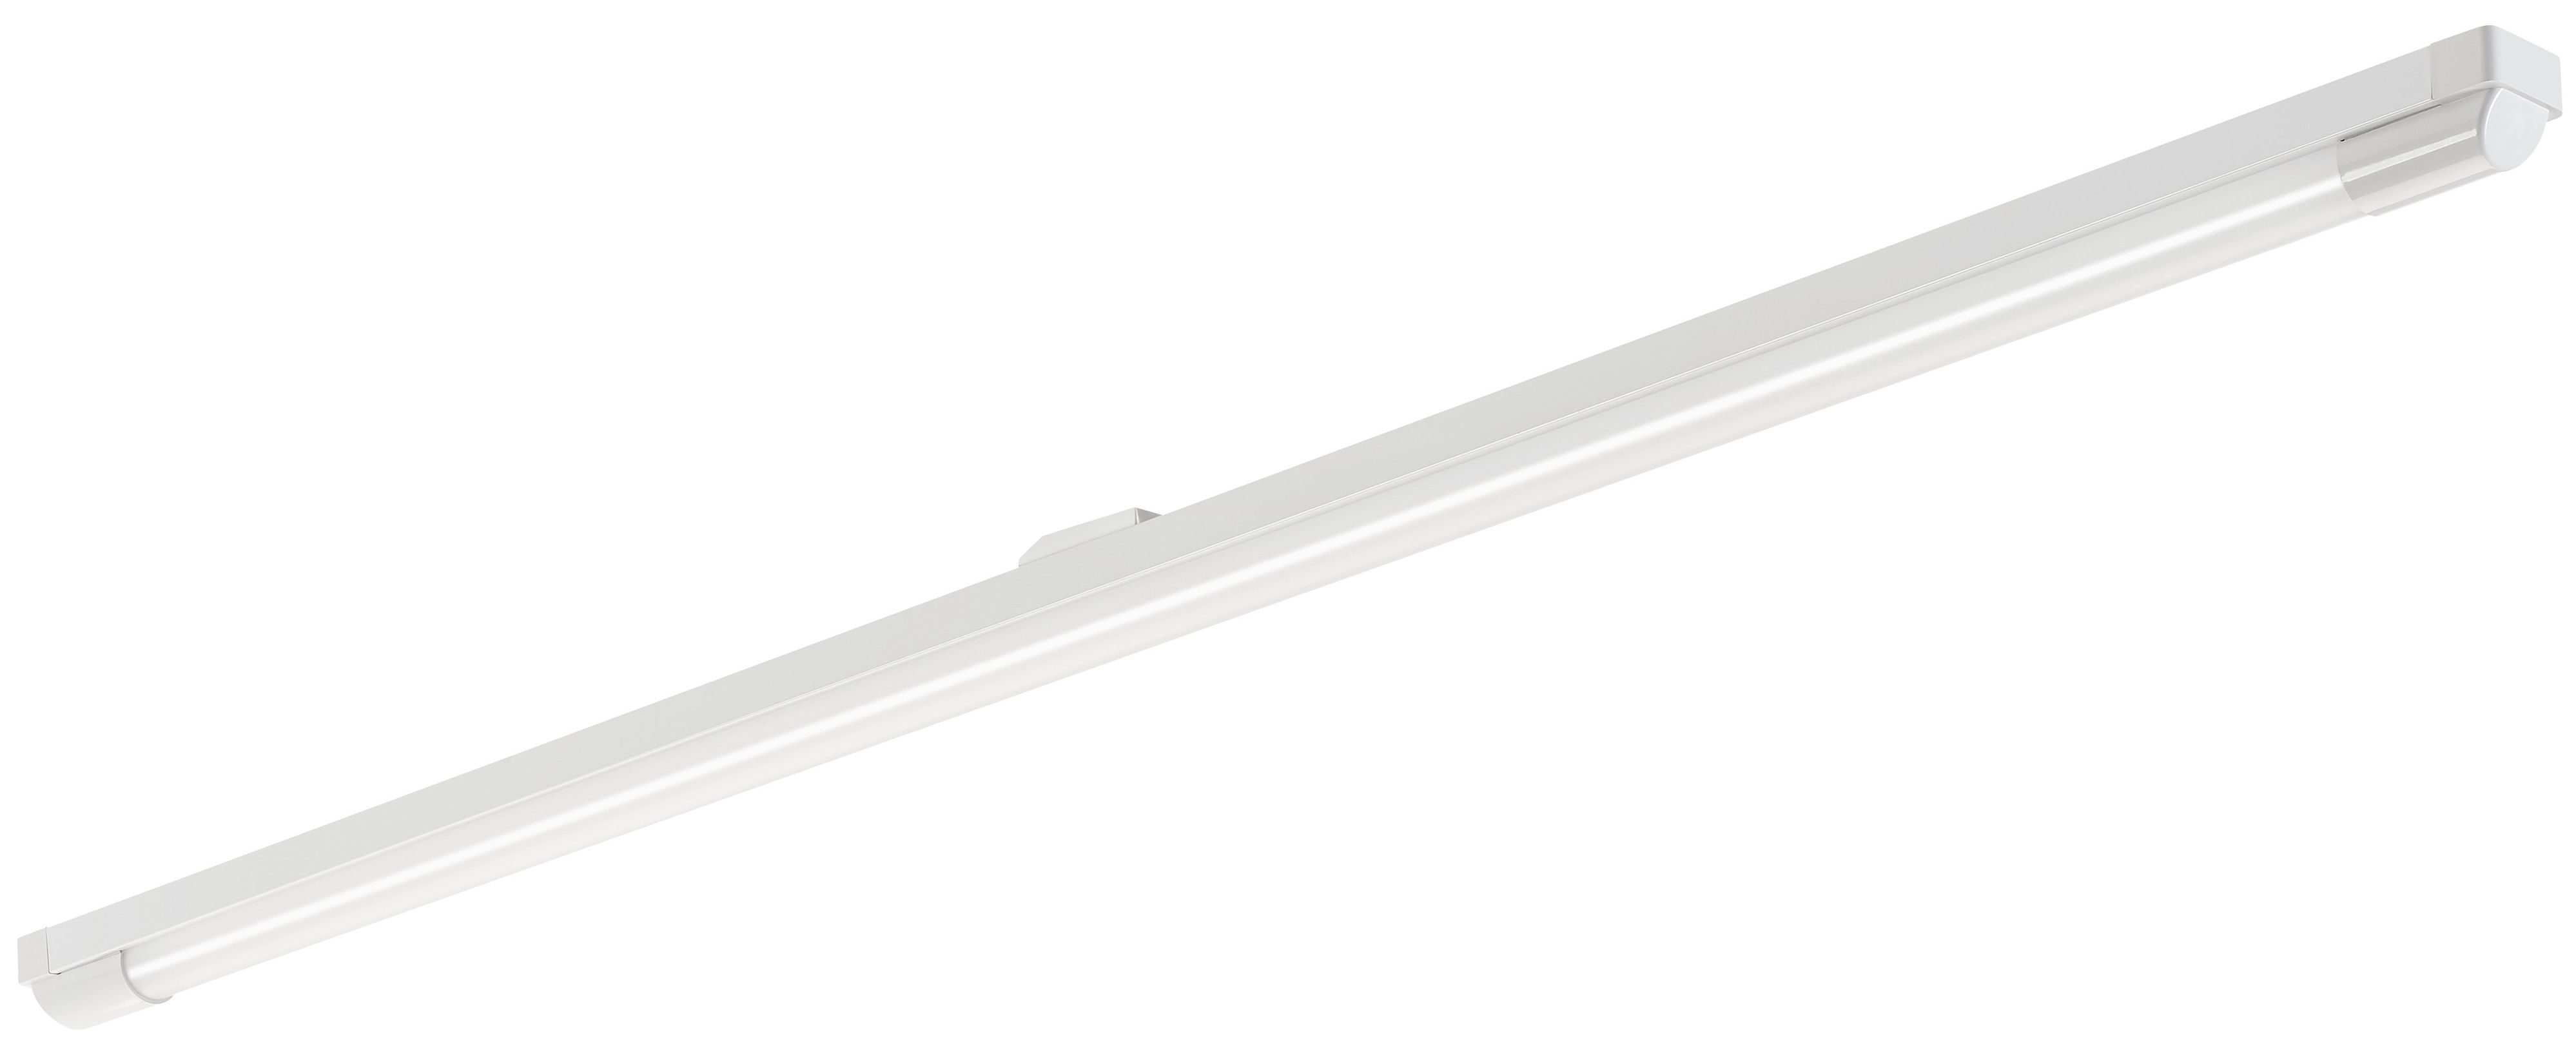 Image of Sylvania Single 4ft IP20 Light Fitting with T8 Integrated LED Tube - 16W